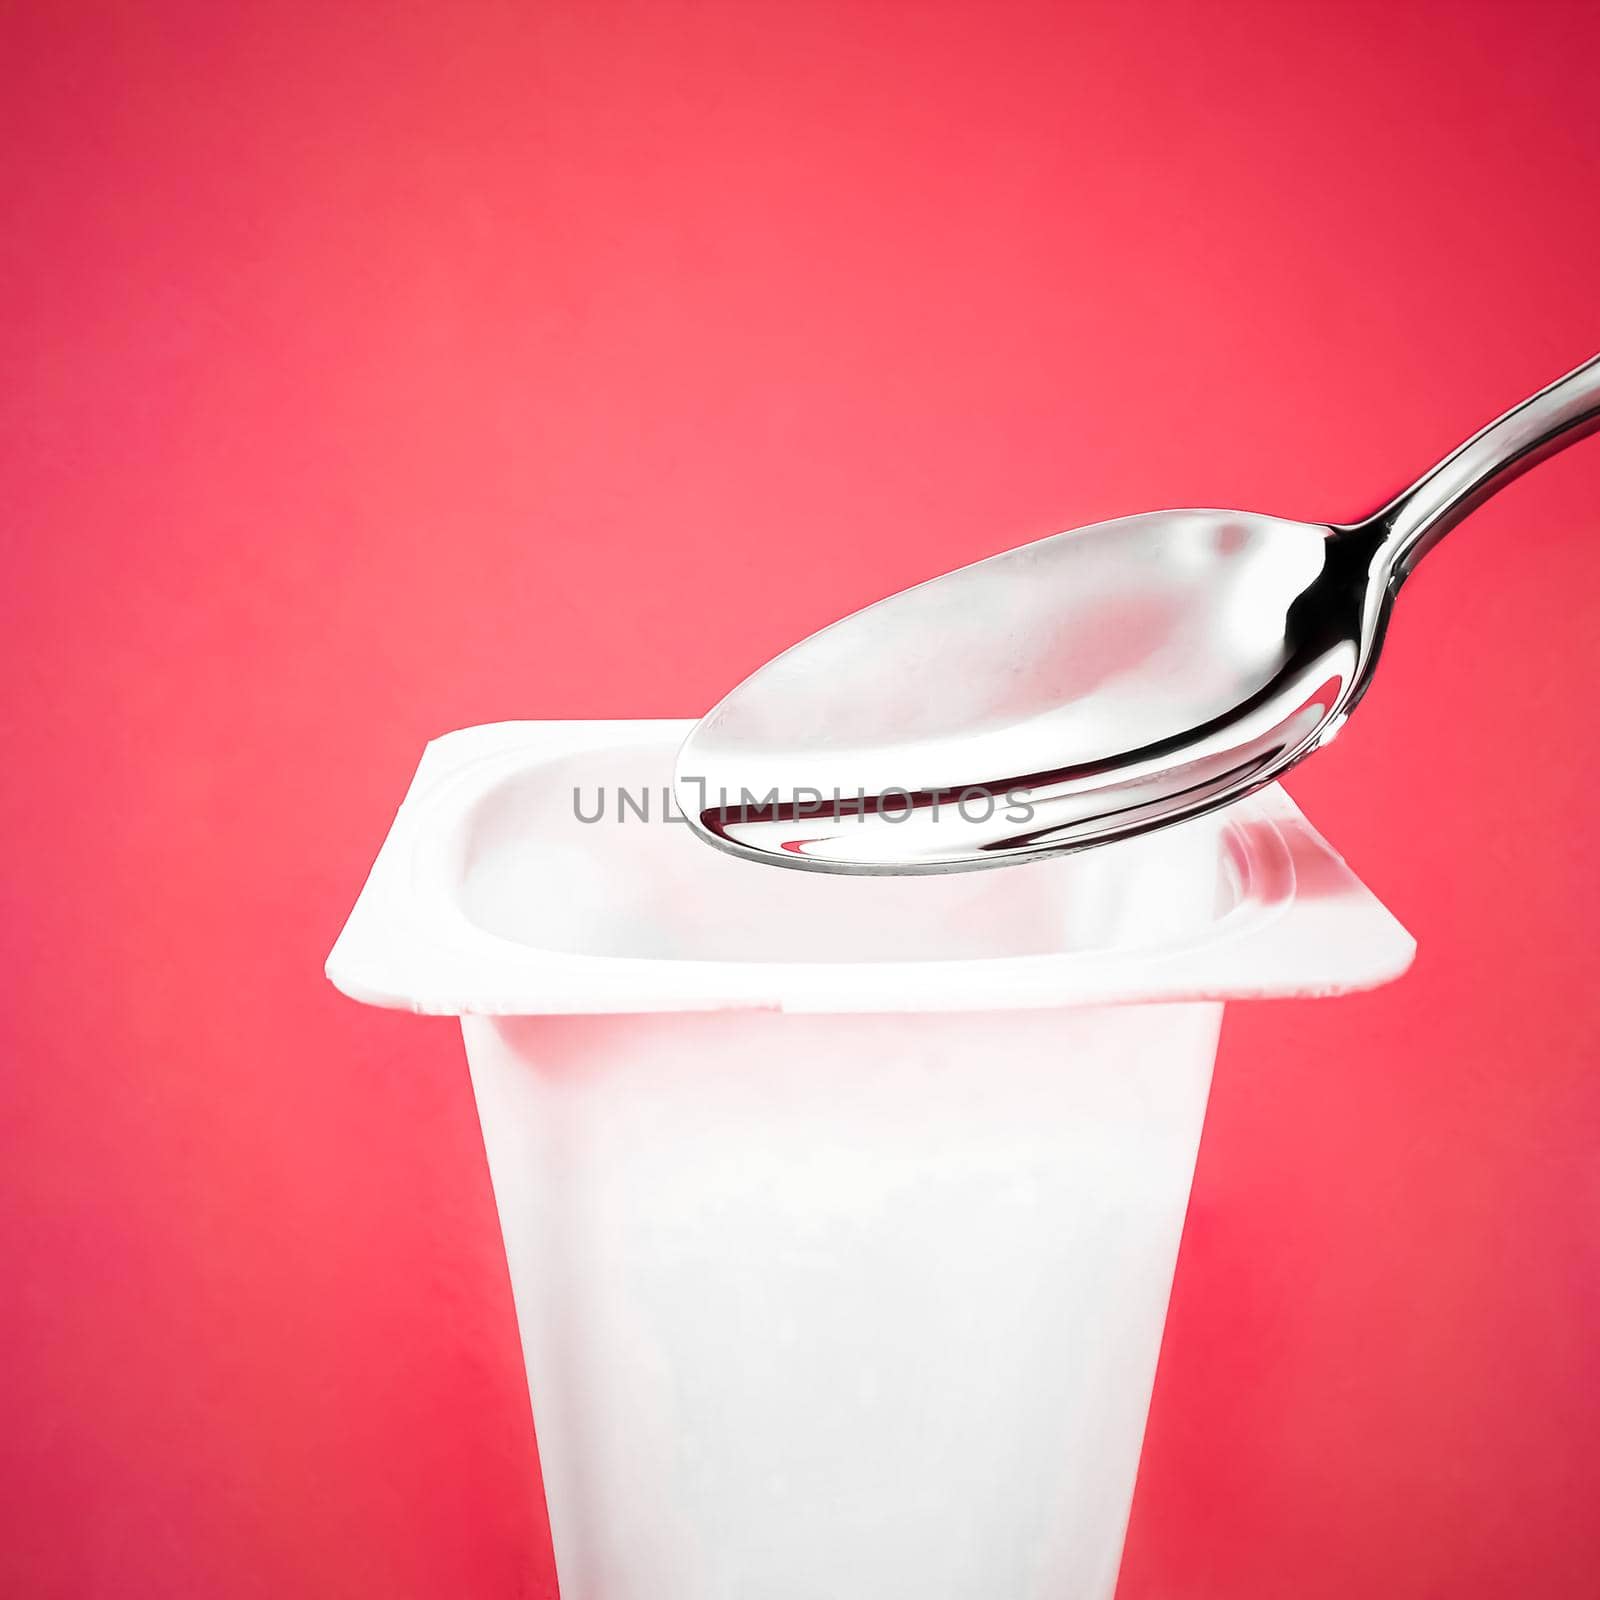 Yogurt cup and silver spoon on red background, white plastic container with yoghurt cream, fresh dairy product for healthy diet and nutrition balance.